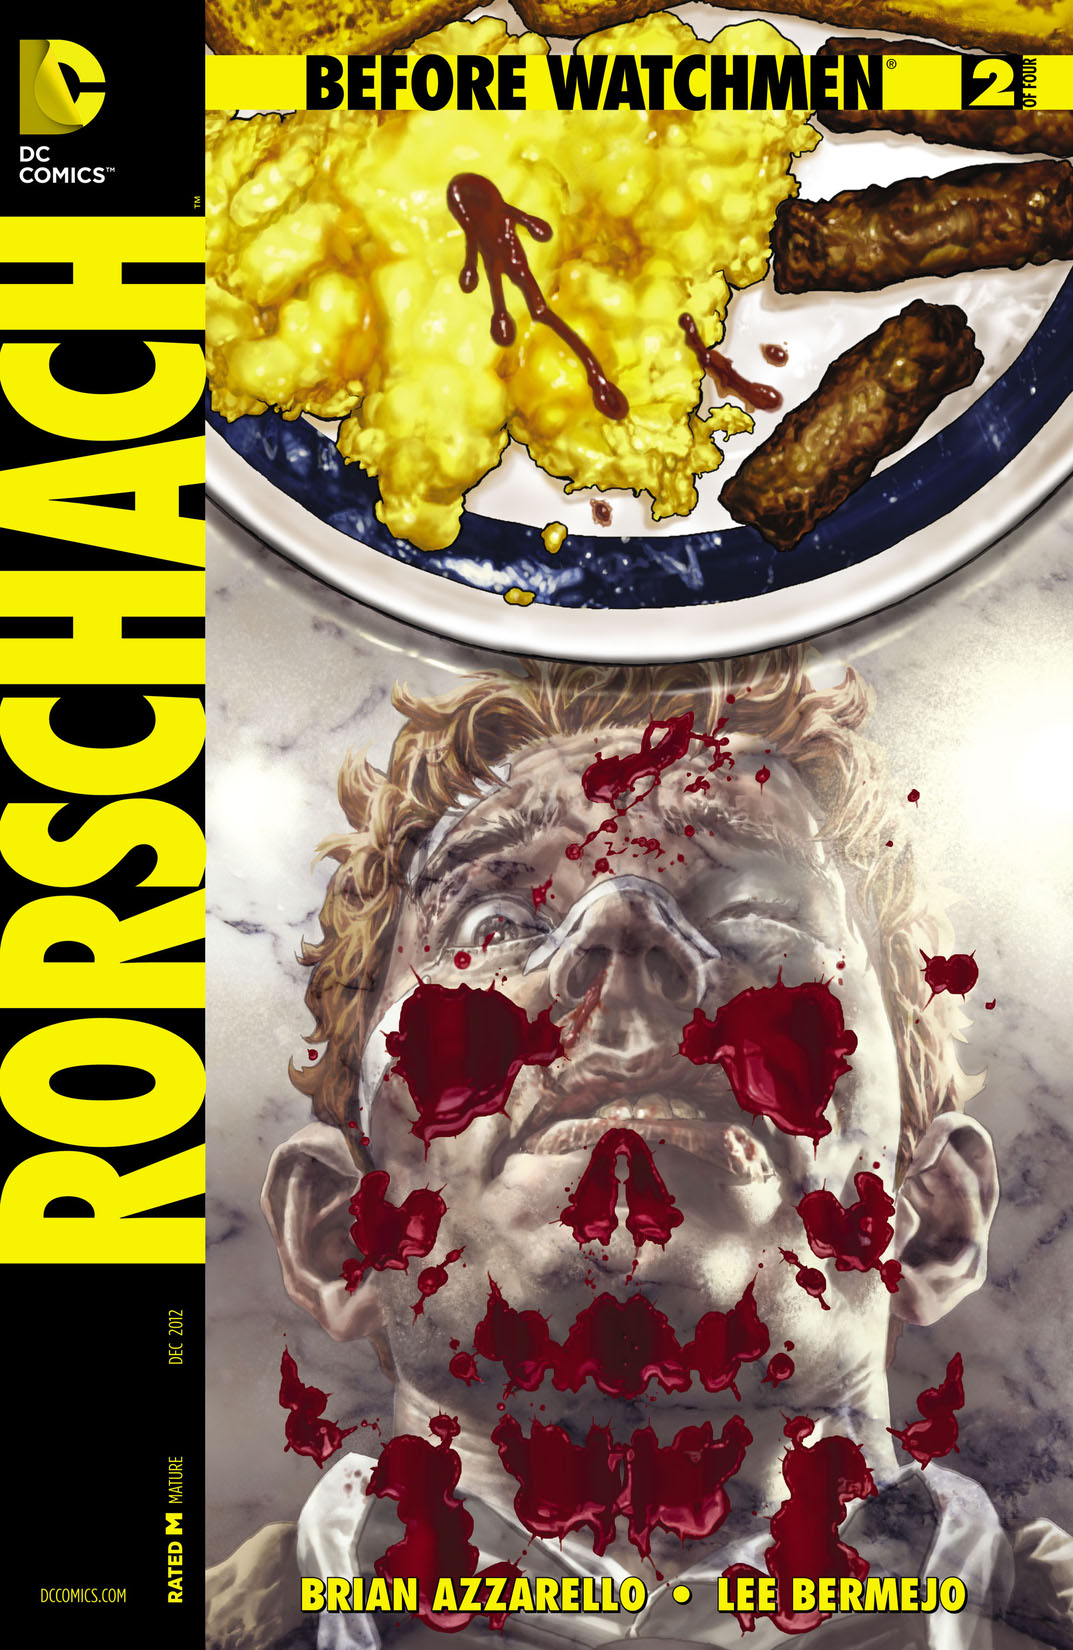 Before Watchmen: Rorschach #2 preview images